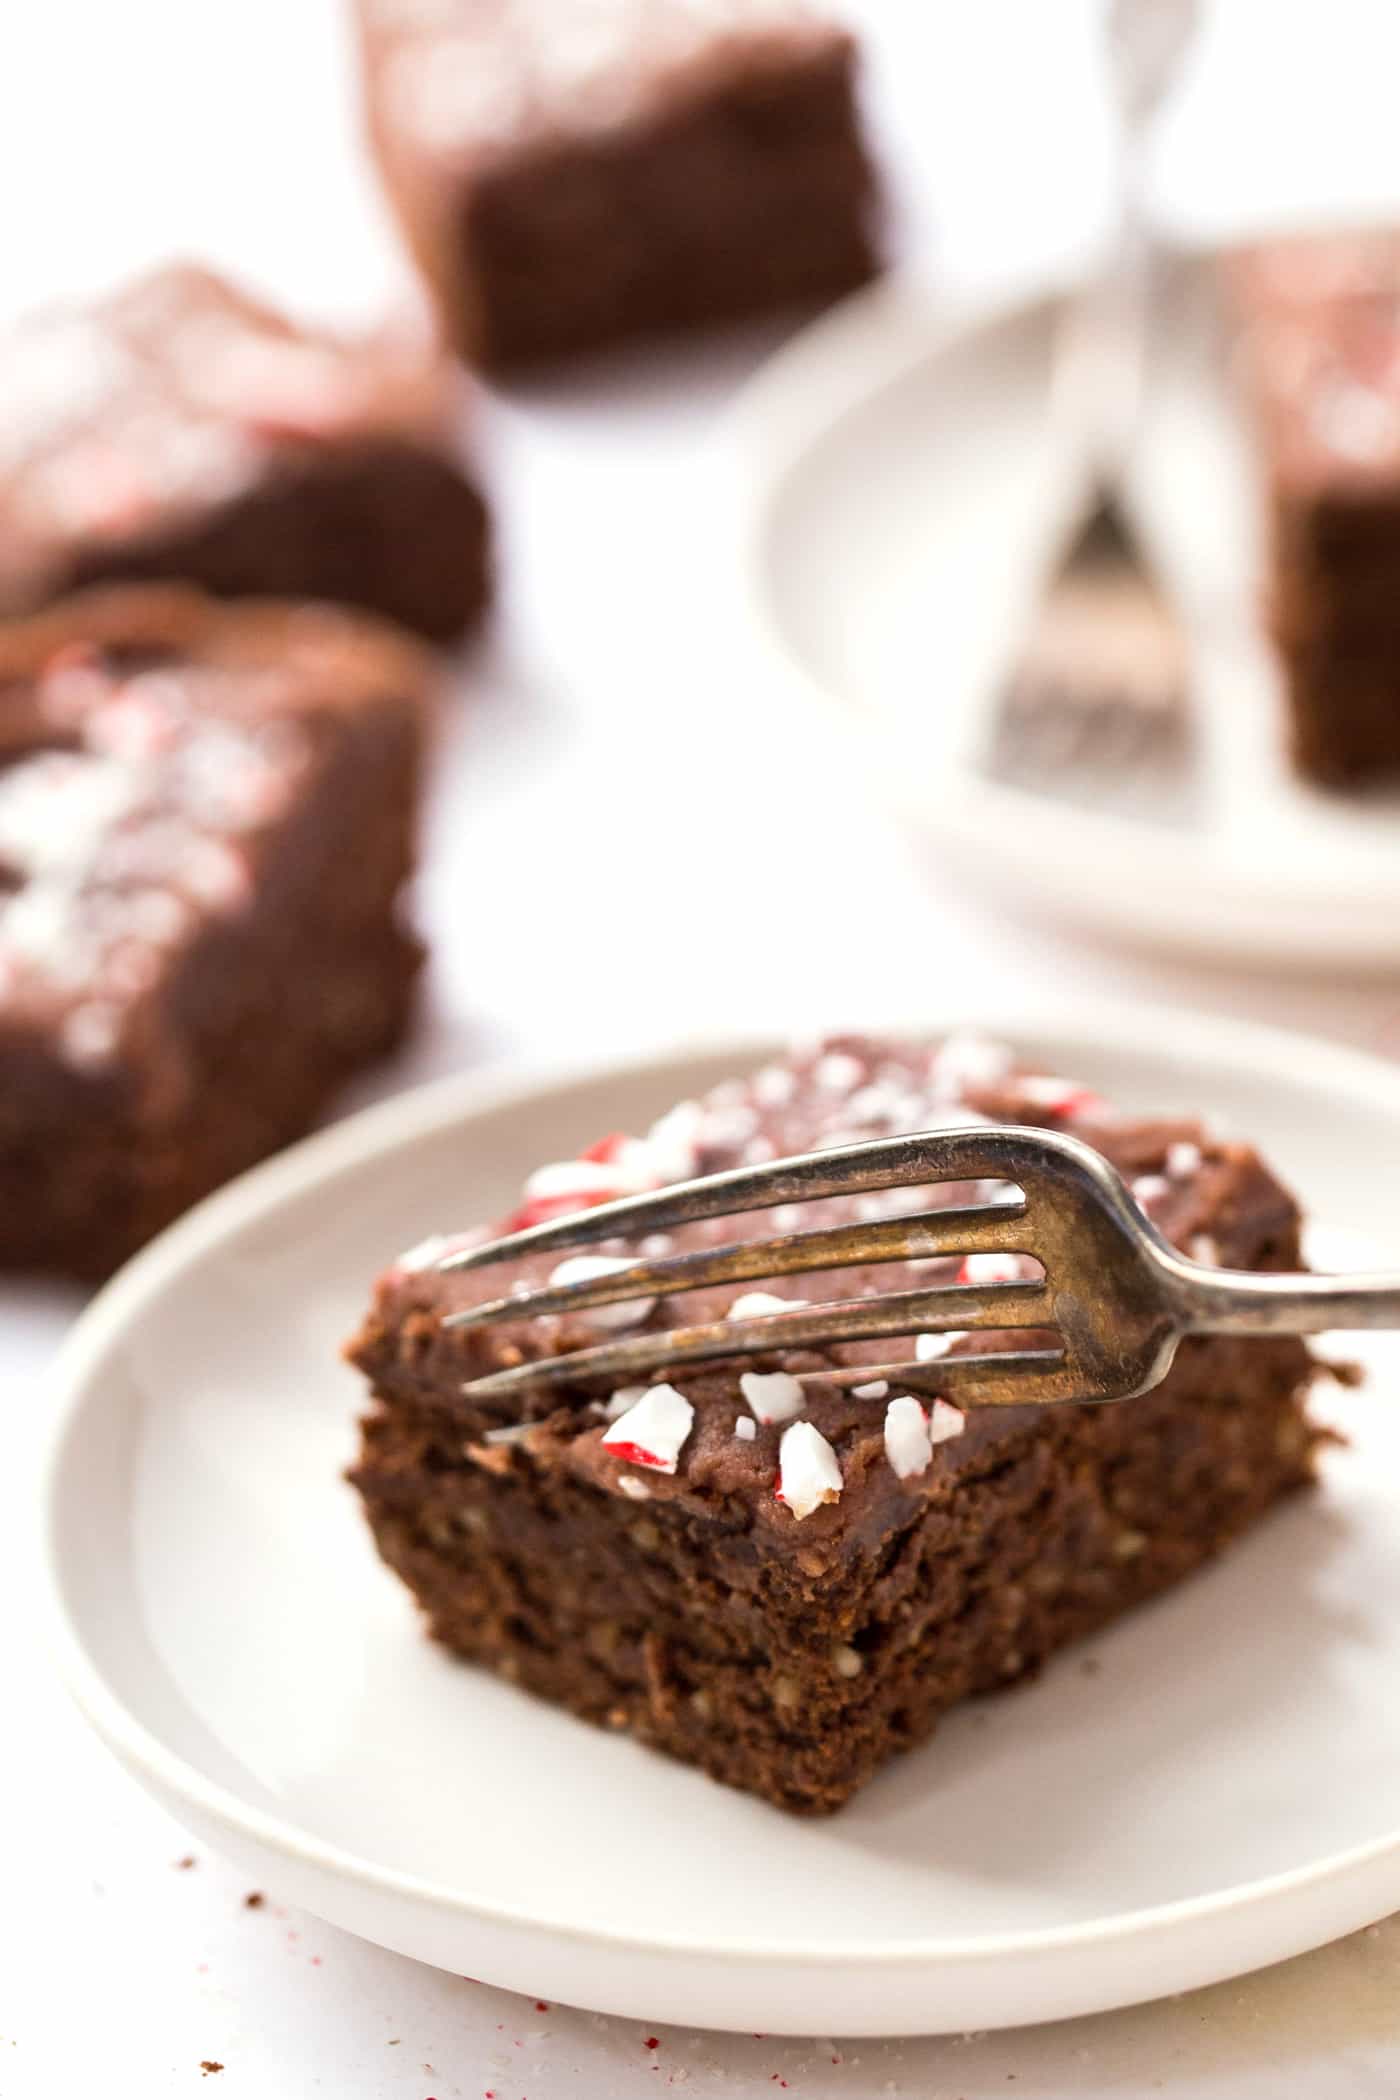 High Protein Chickpea Brownies topped with a chocolate coconut butter icing and crushed peppermint candies! A HEALTHY holiday treat!